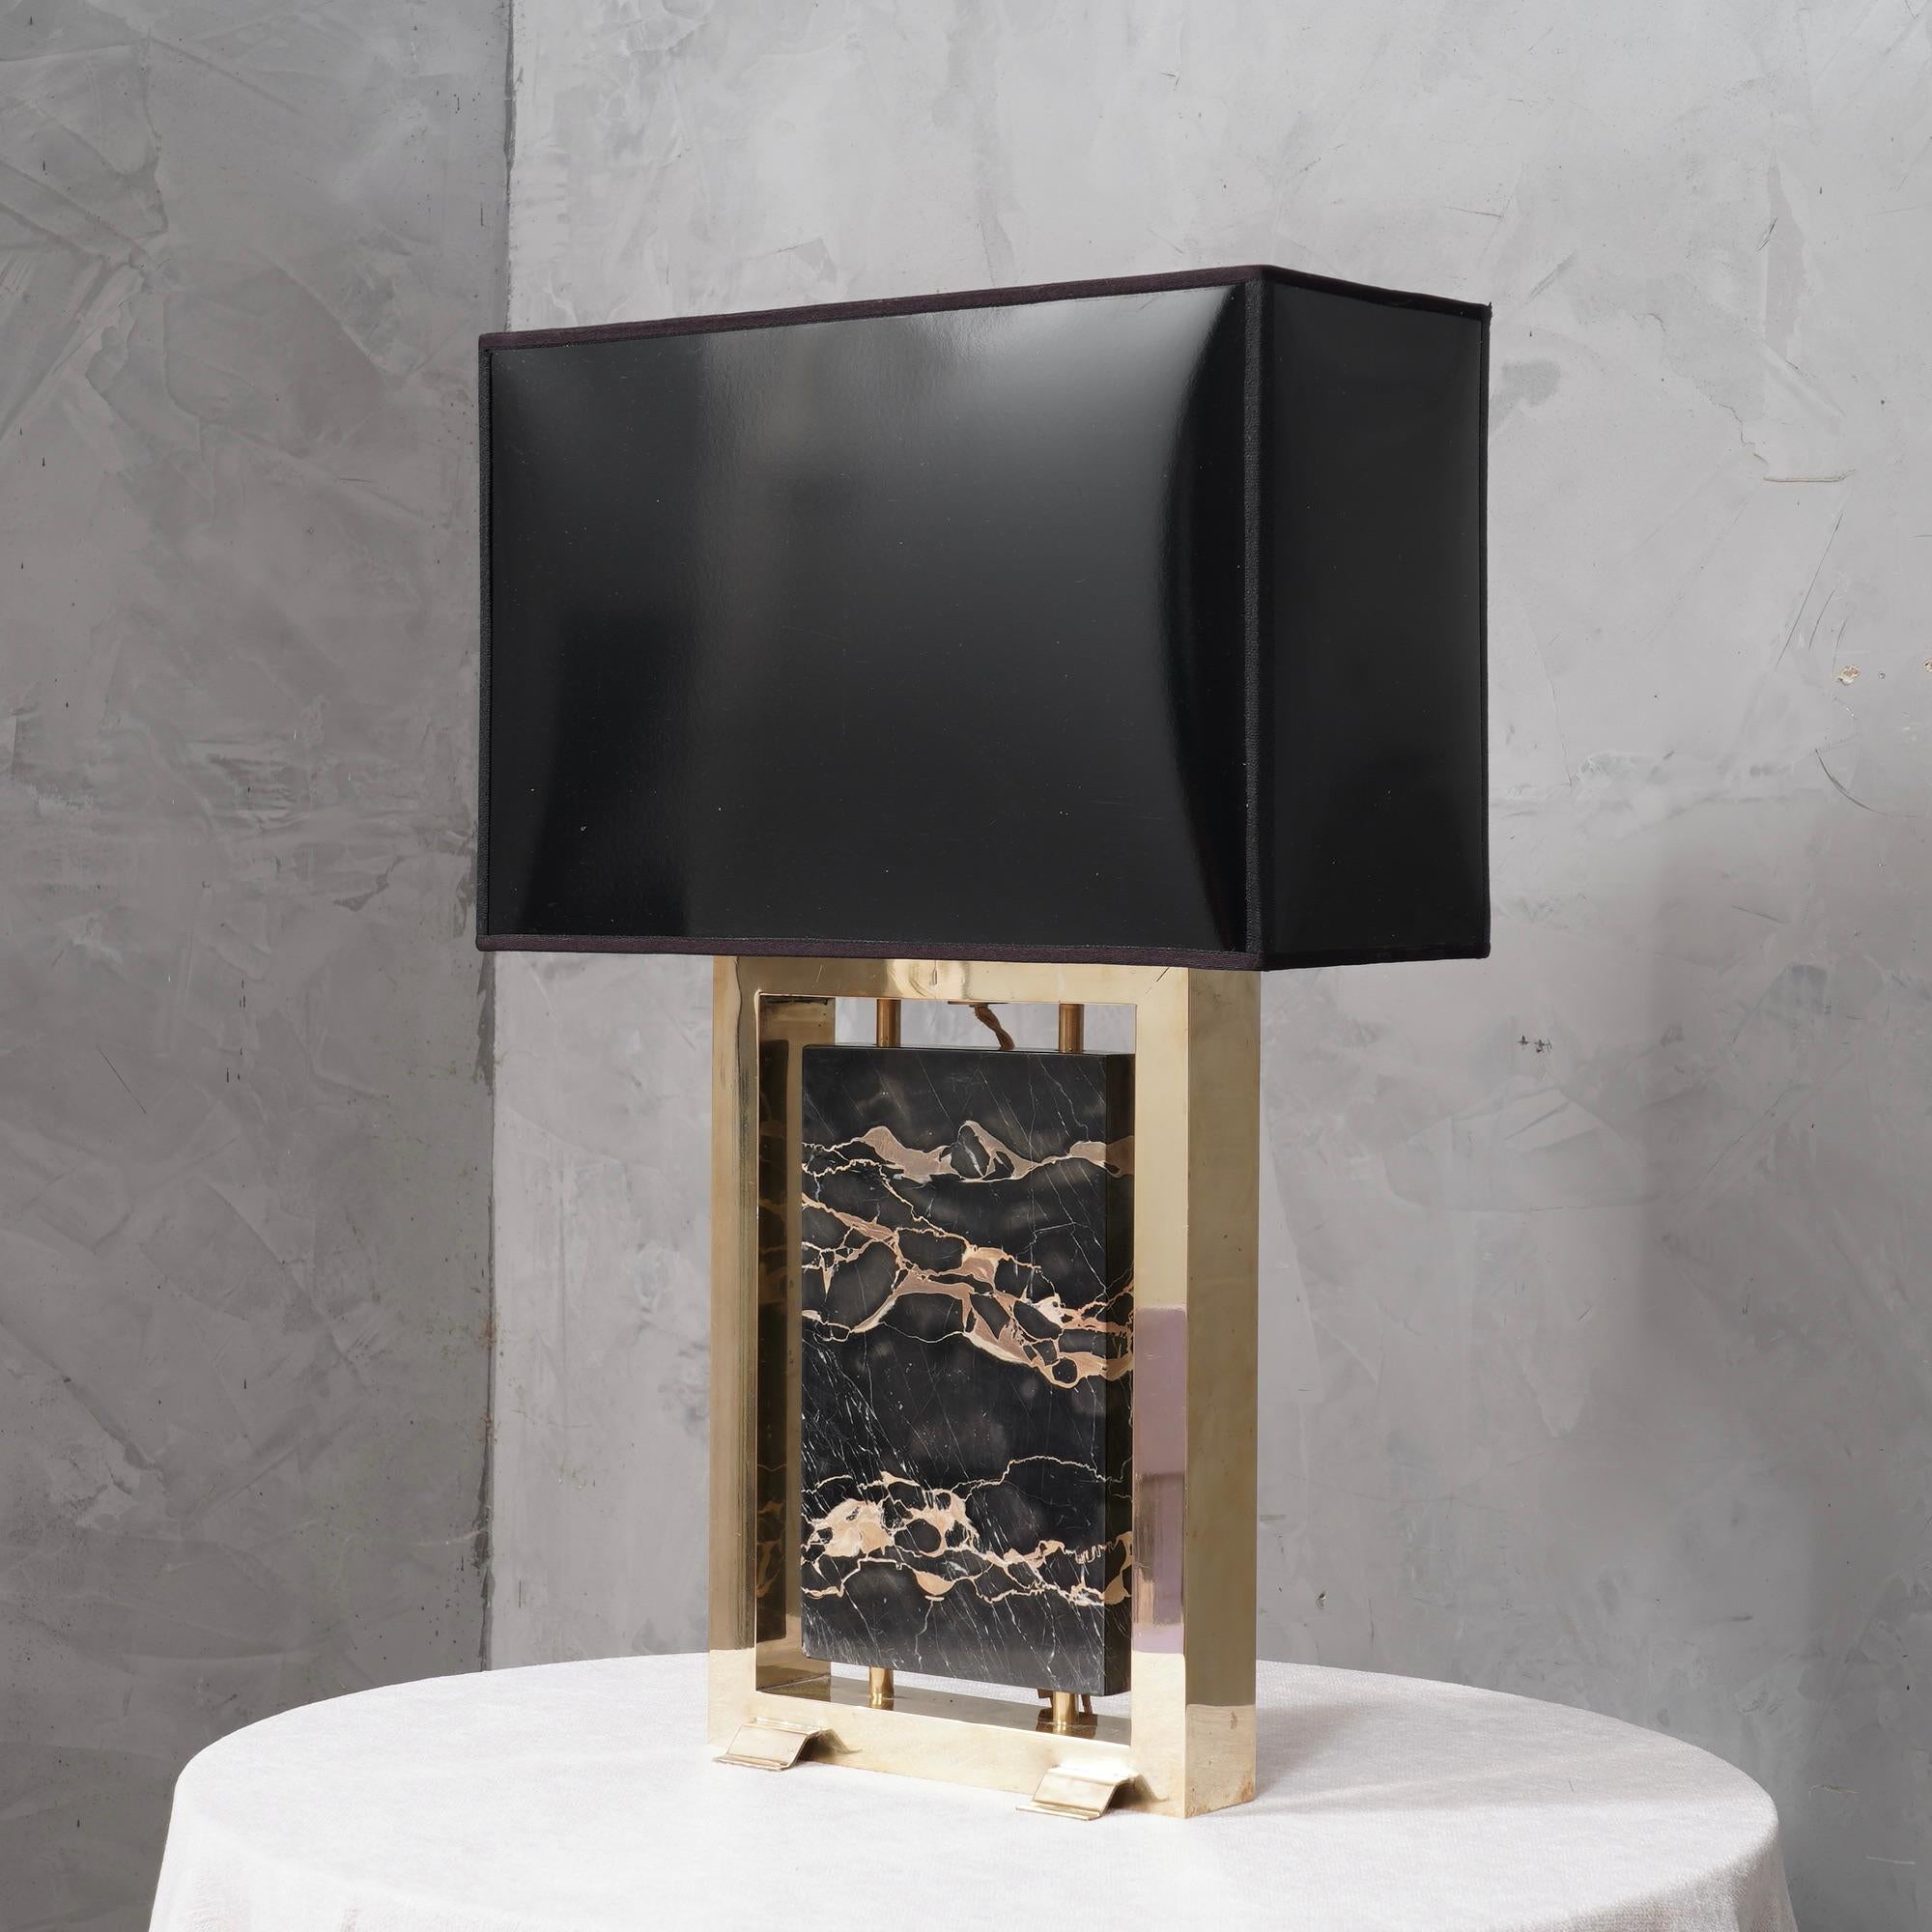 Italian Portoro Marble and Brass Table Lamp, 2000 For Sale